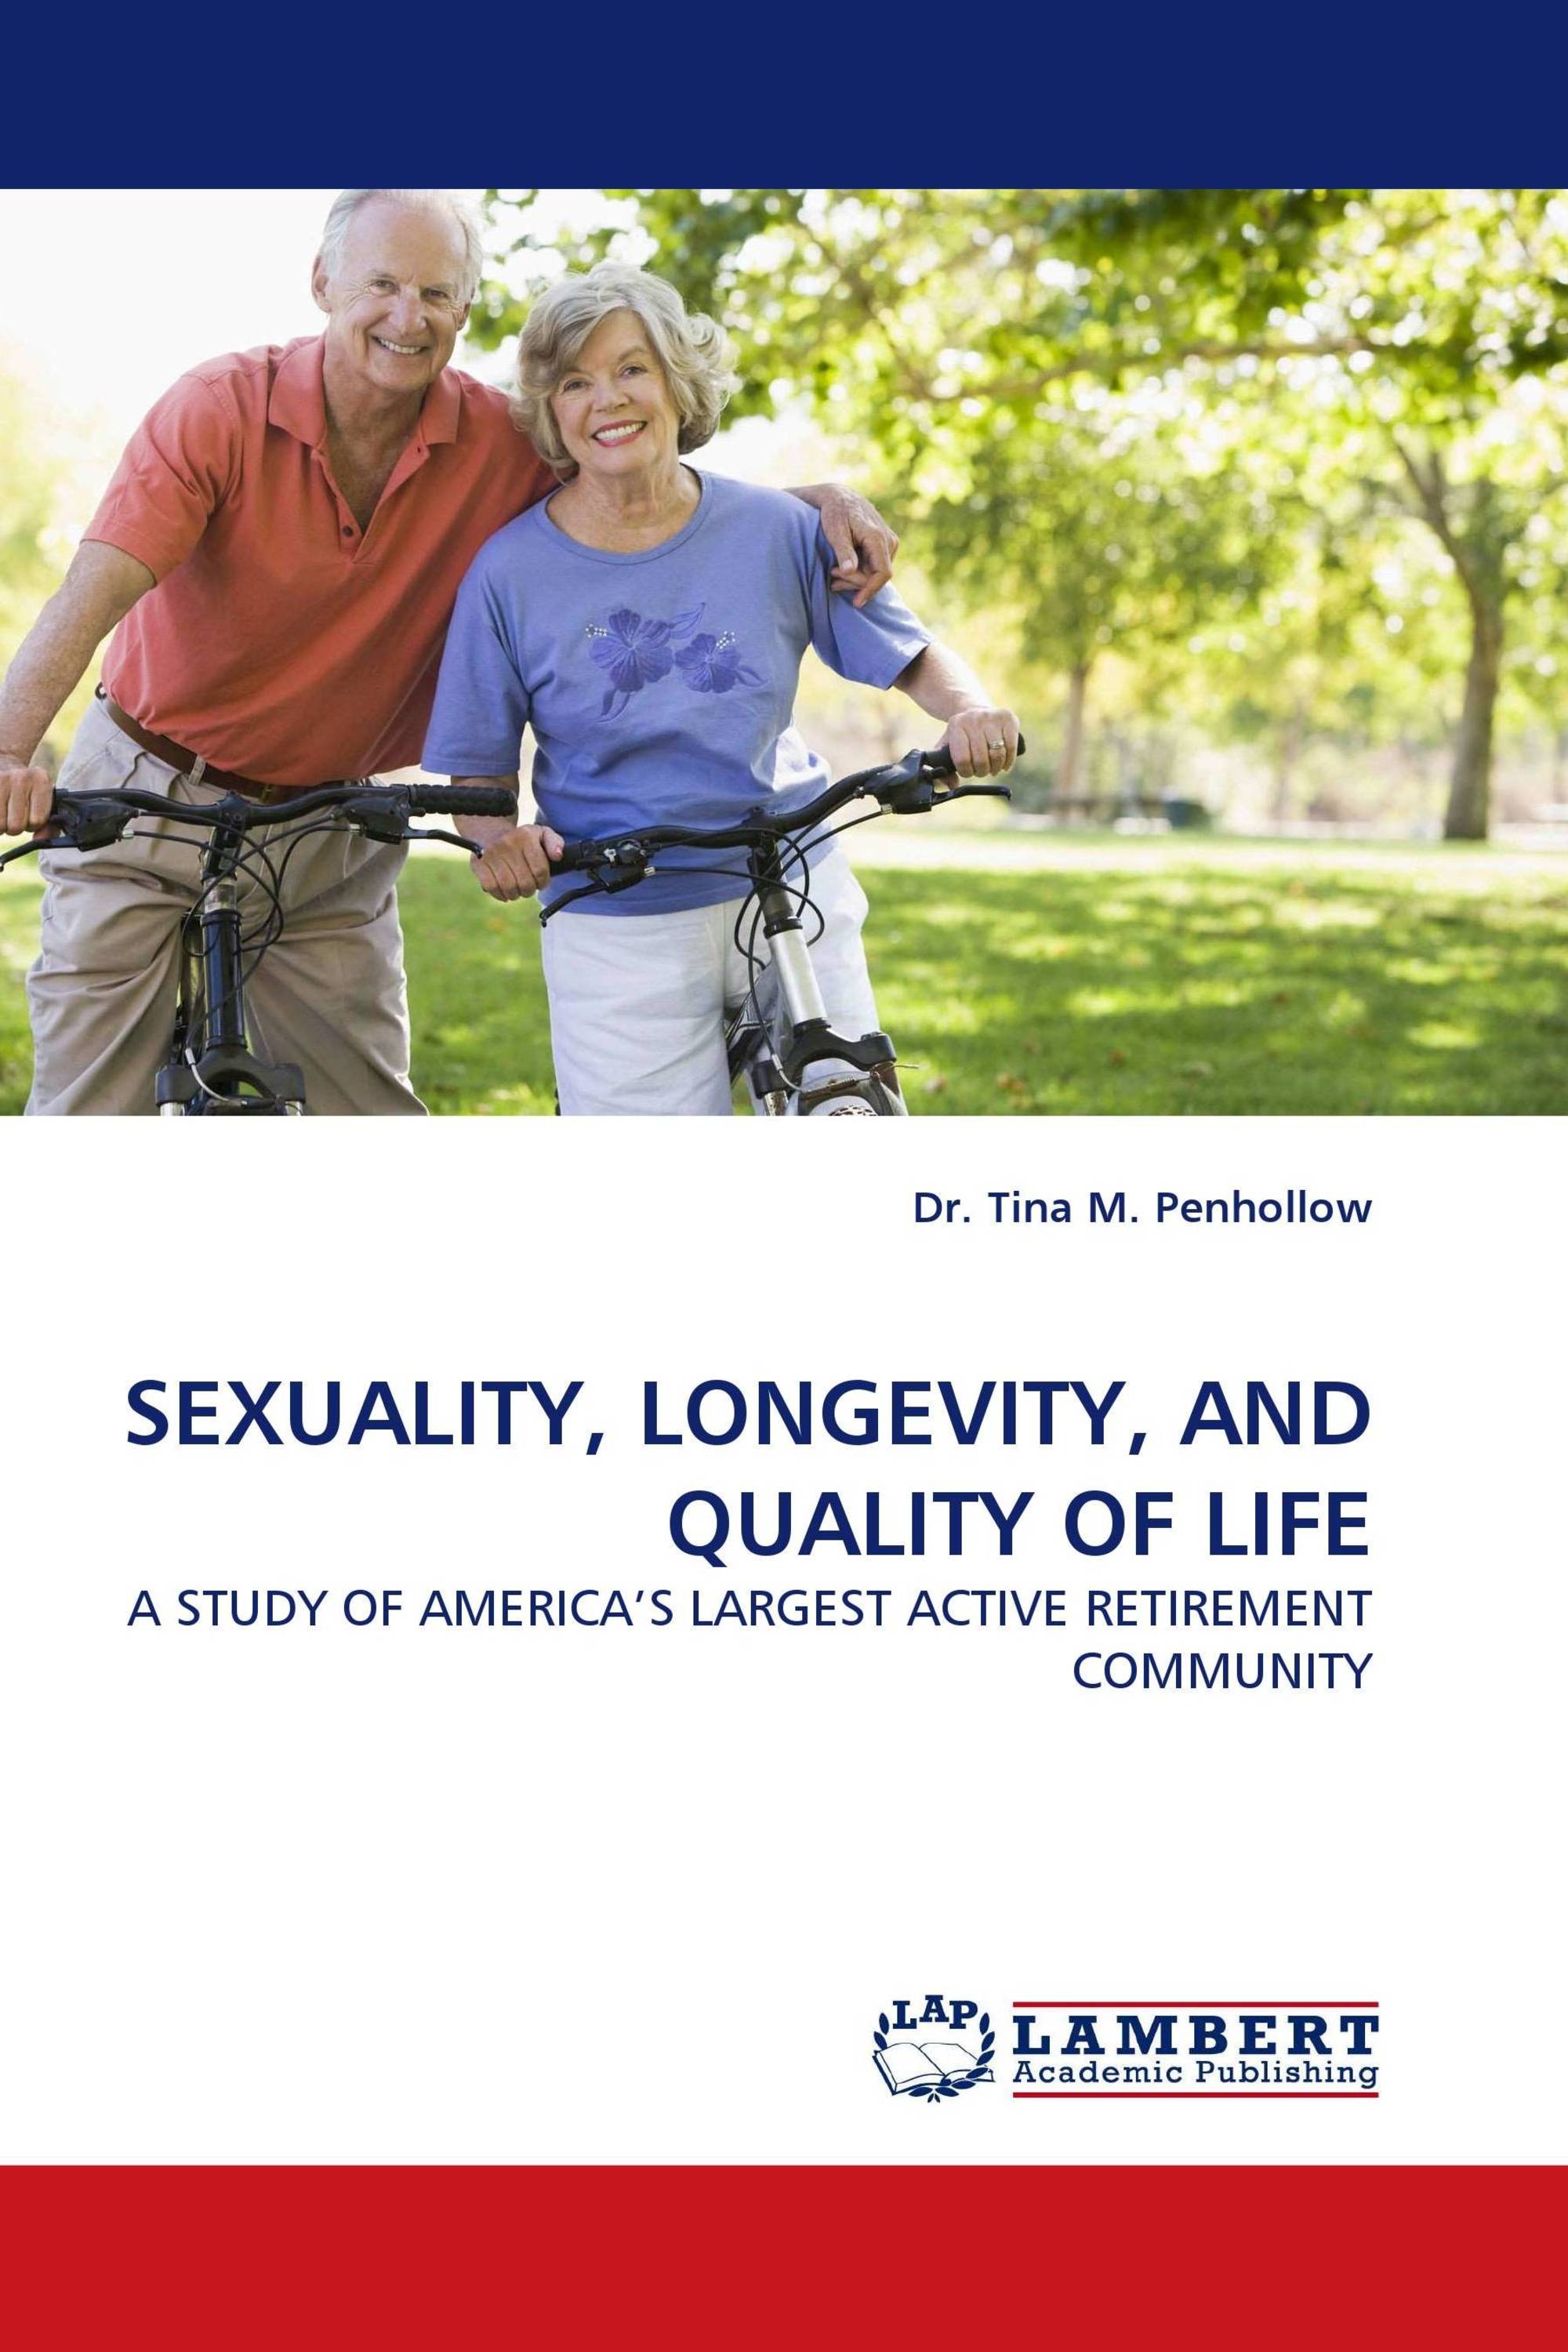 SEXUALITY, LONGEVITY, AND QUALITY OF LIFE